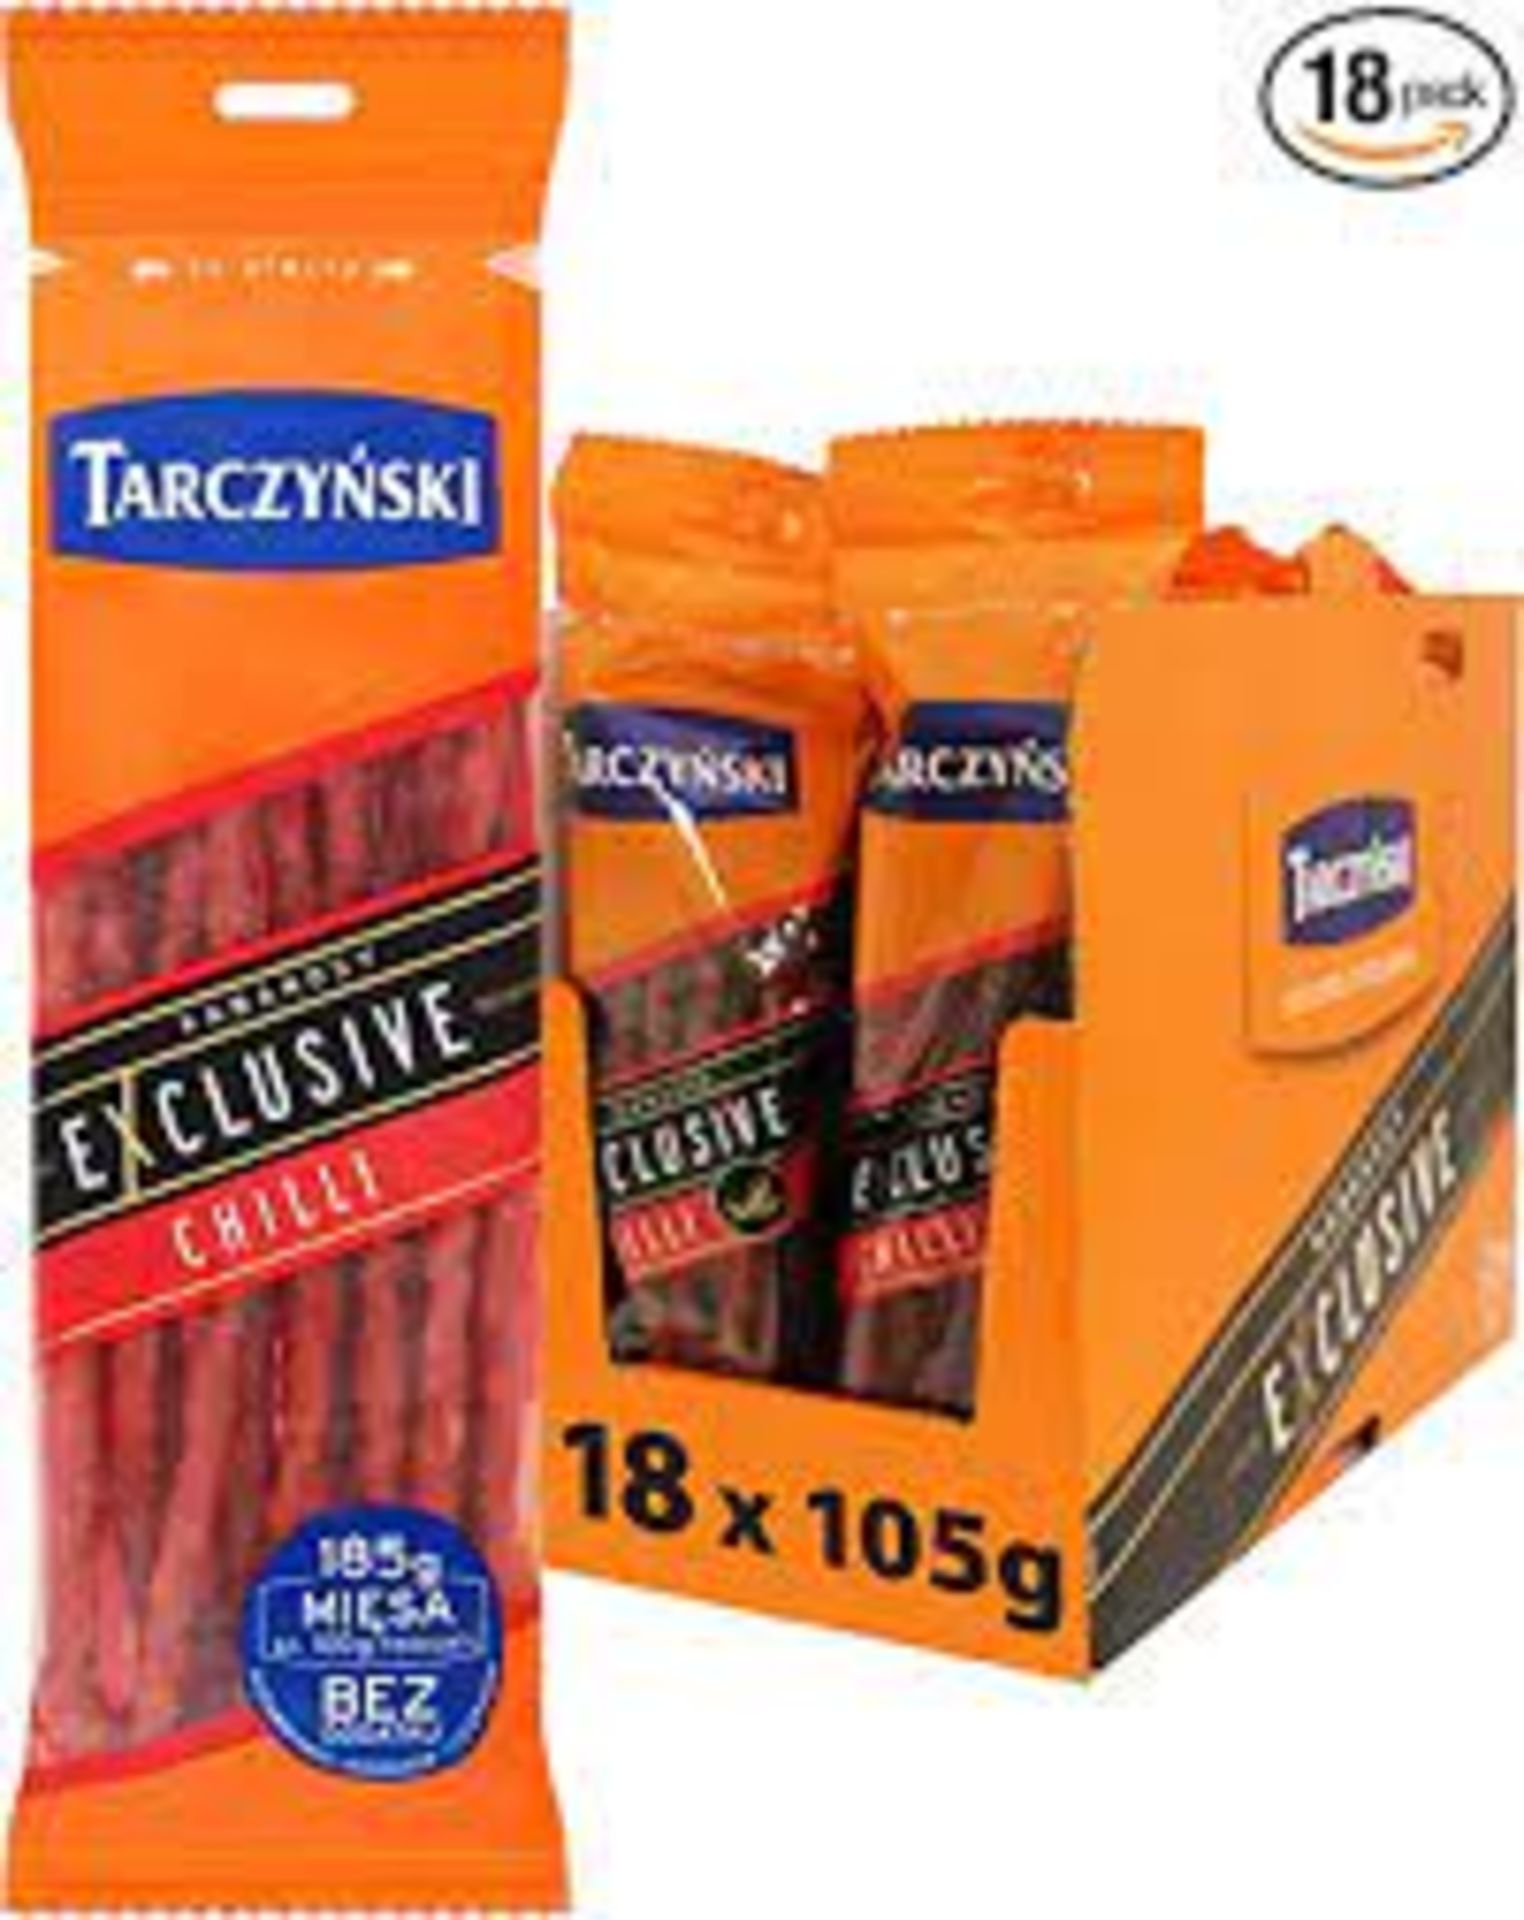 RRP £1199 (Approx. Count 63) spW57n3426B (2) 15 x Pork & Chilli Kabanos Sausage 105G (Pack of